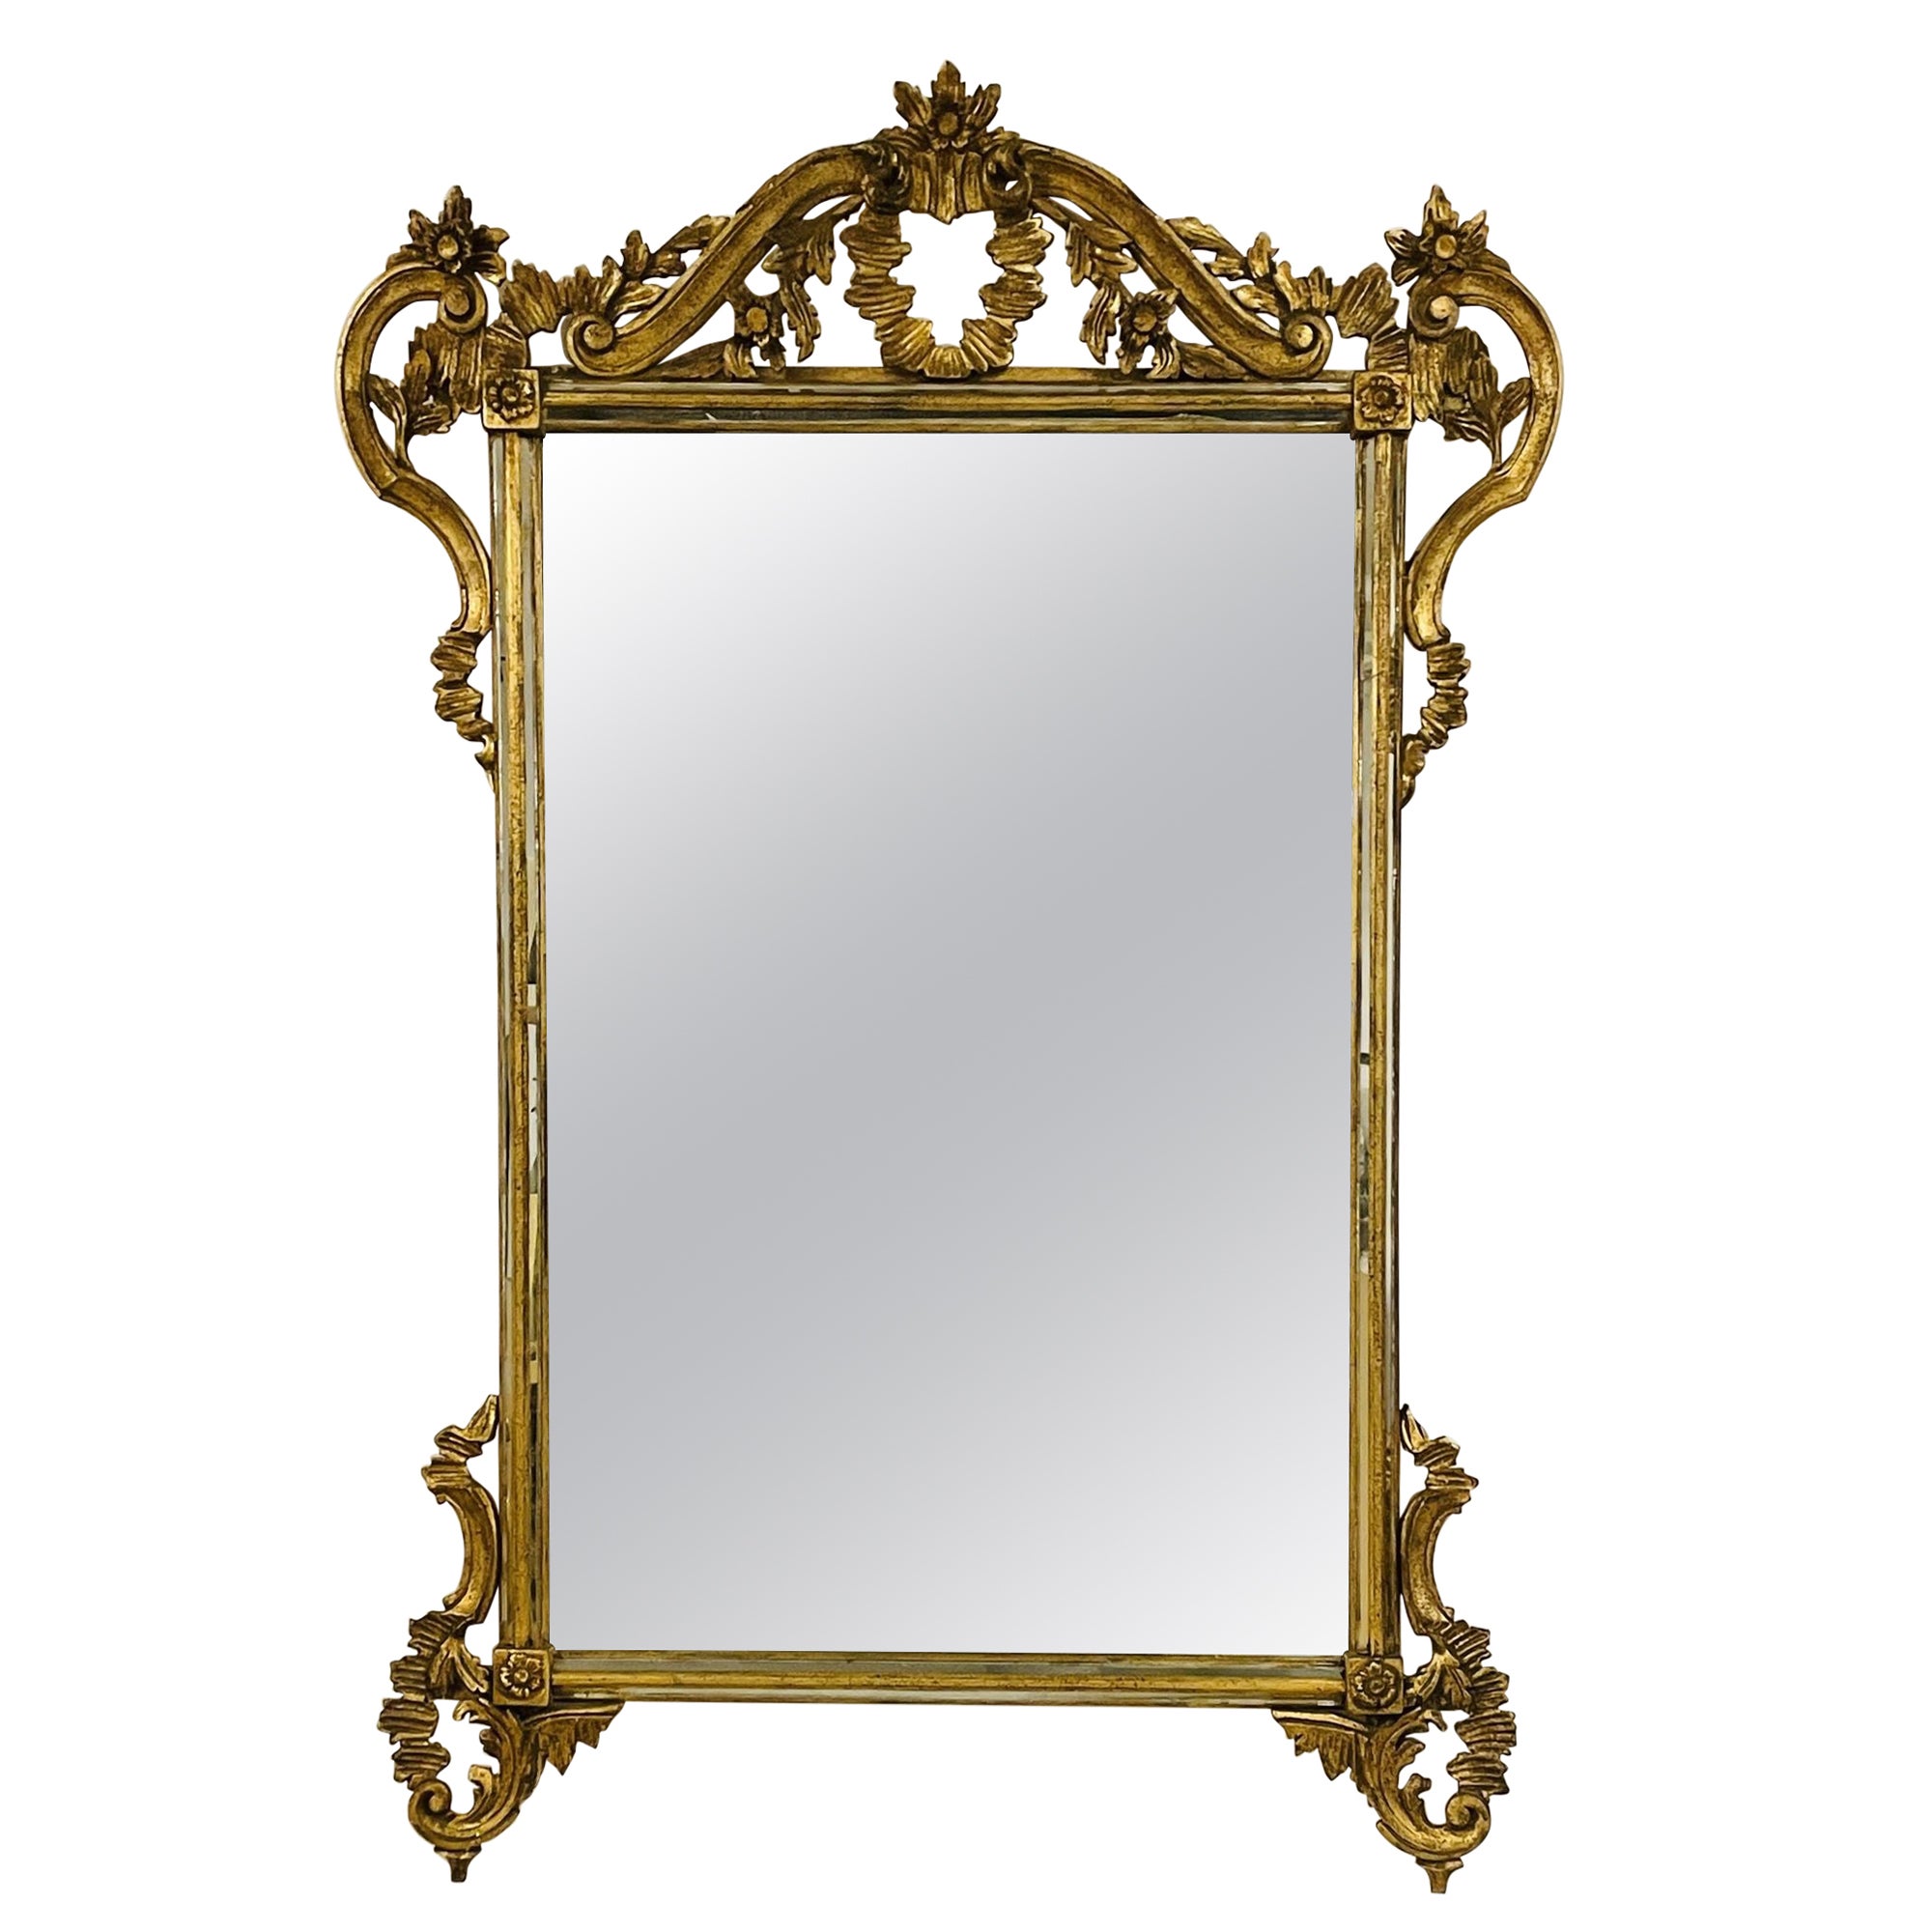 Italian Wall, Console, Mantle or Pier Mirror, 1930s, Gilt Gold, Carved